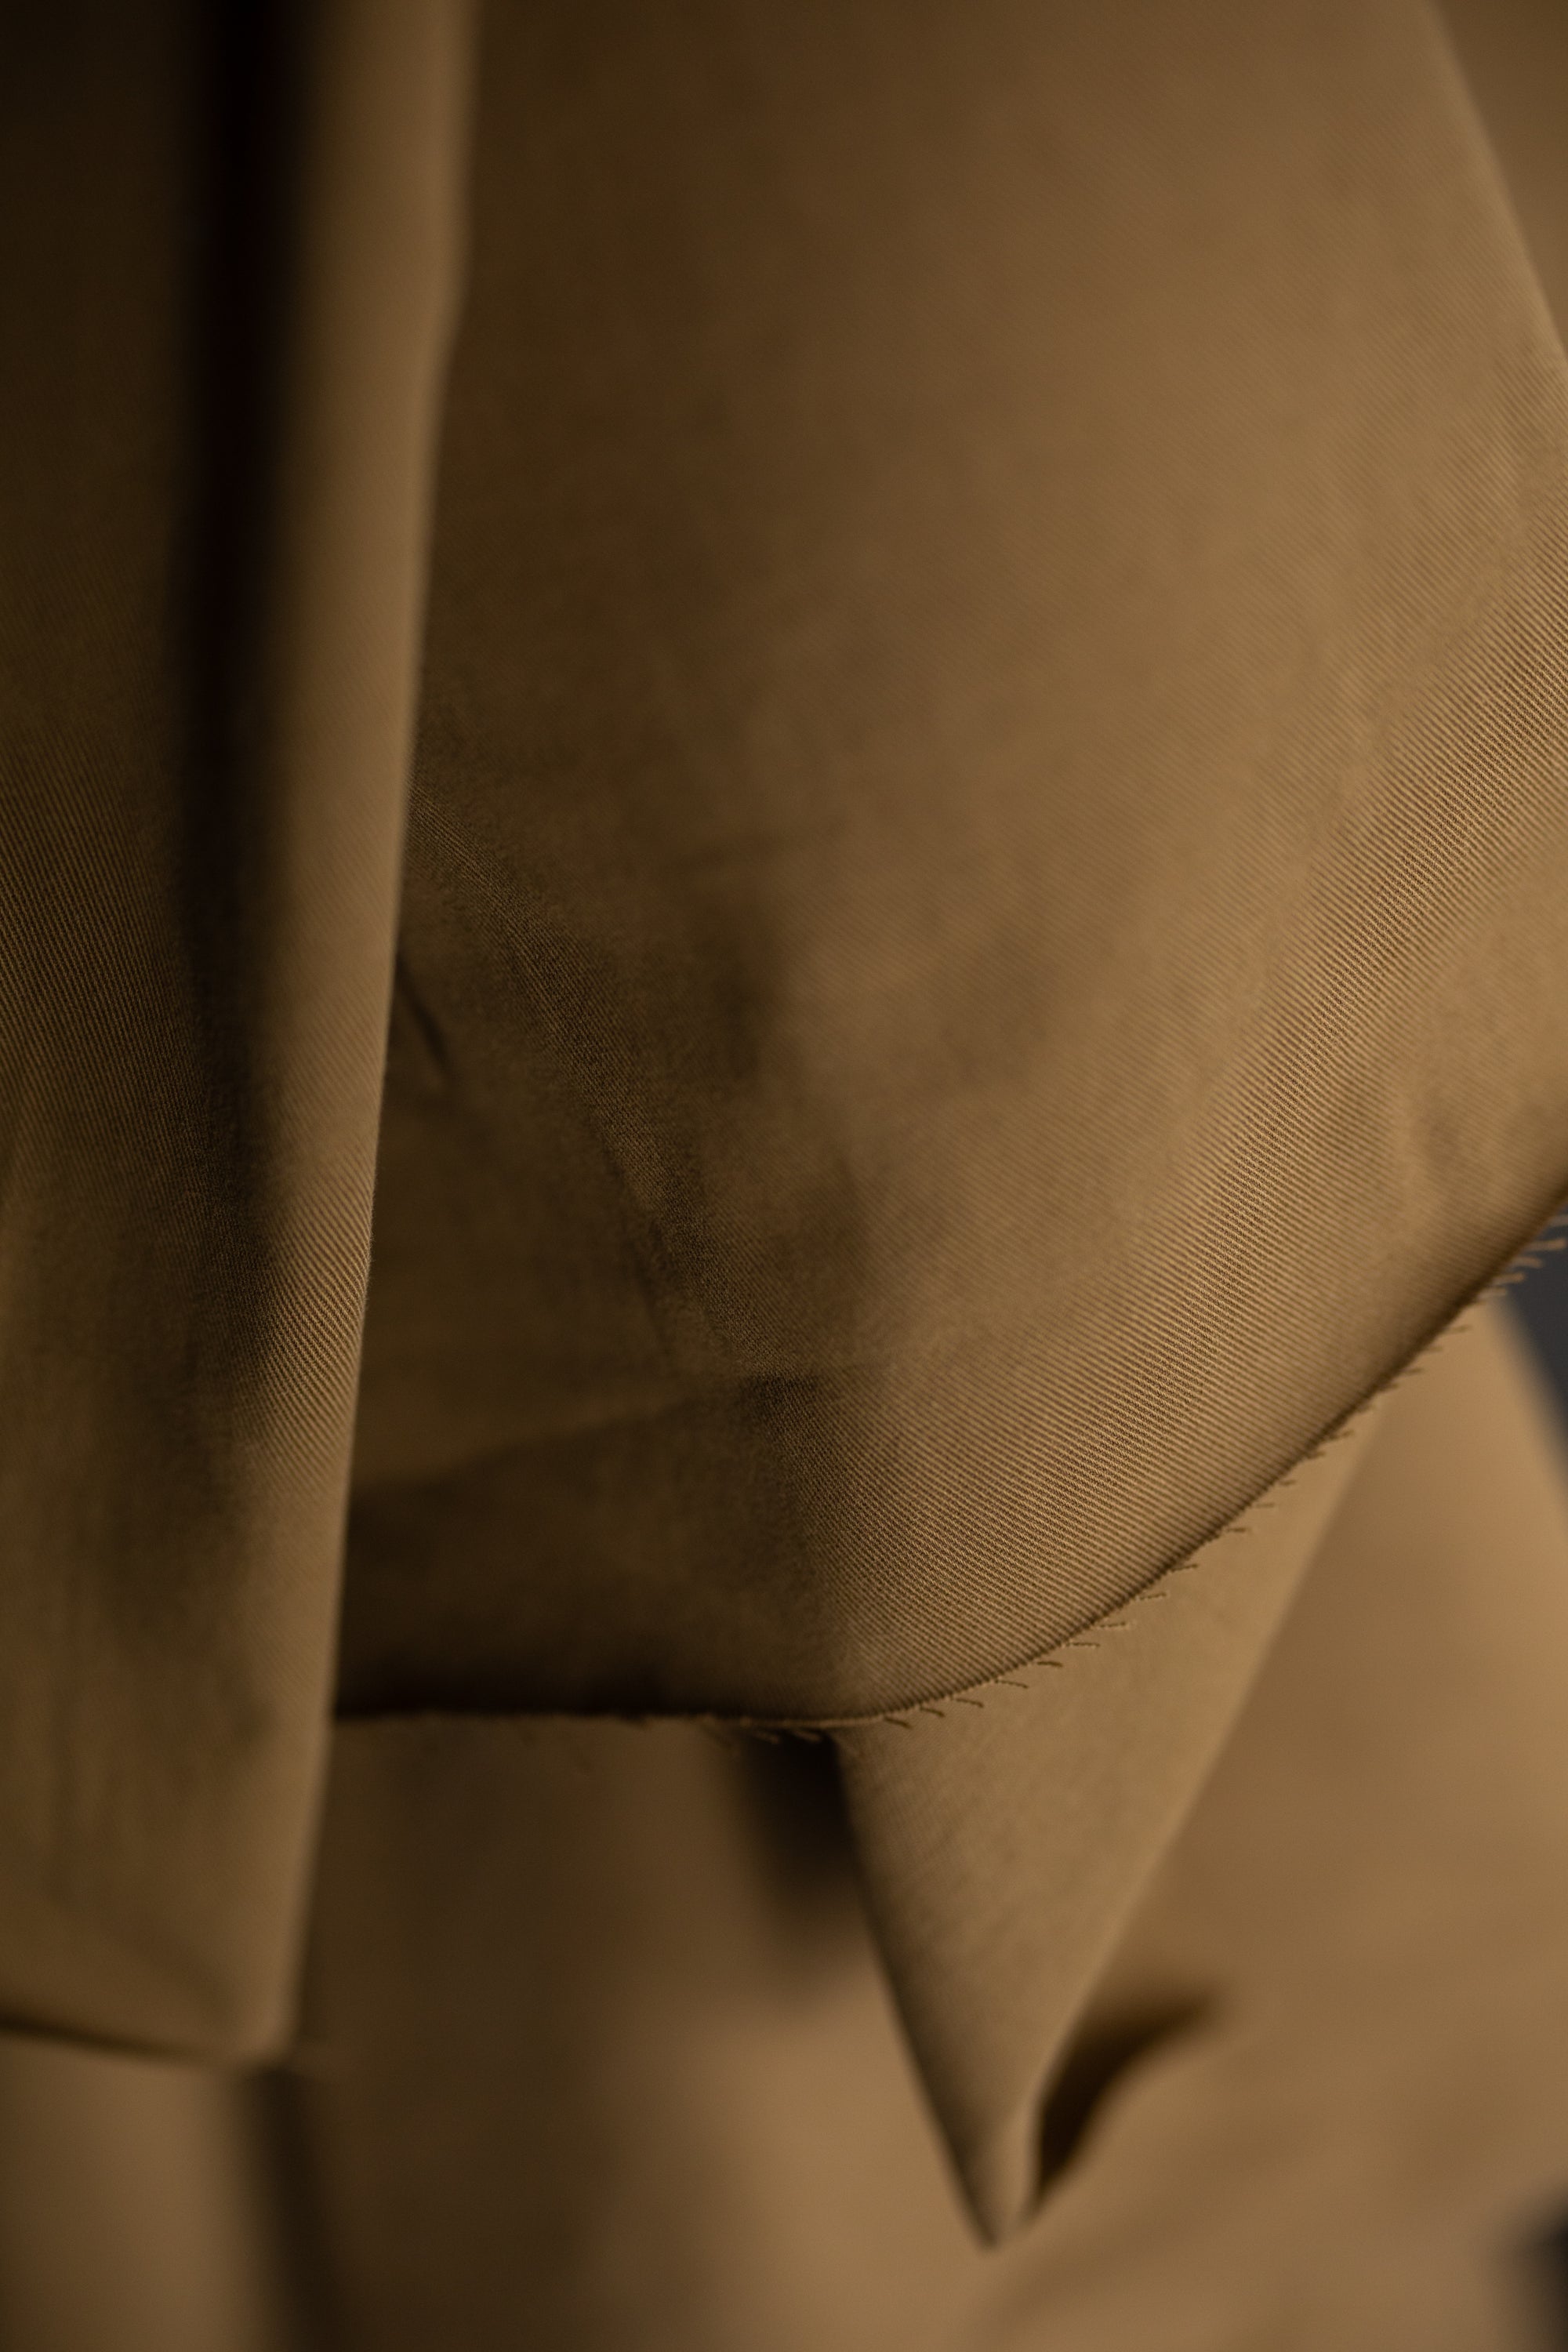 Close up of Olive Tan sanded cotton twill fabric.